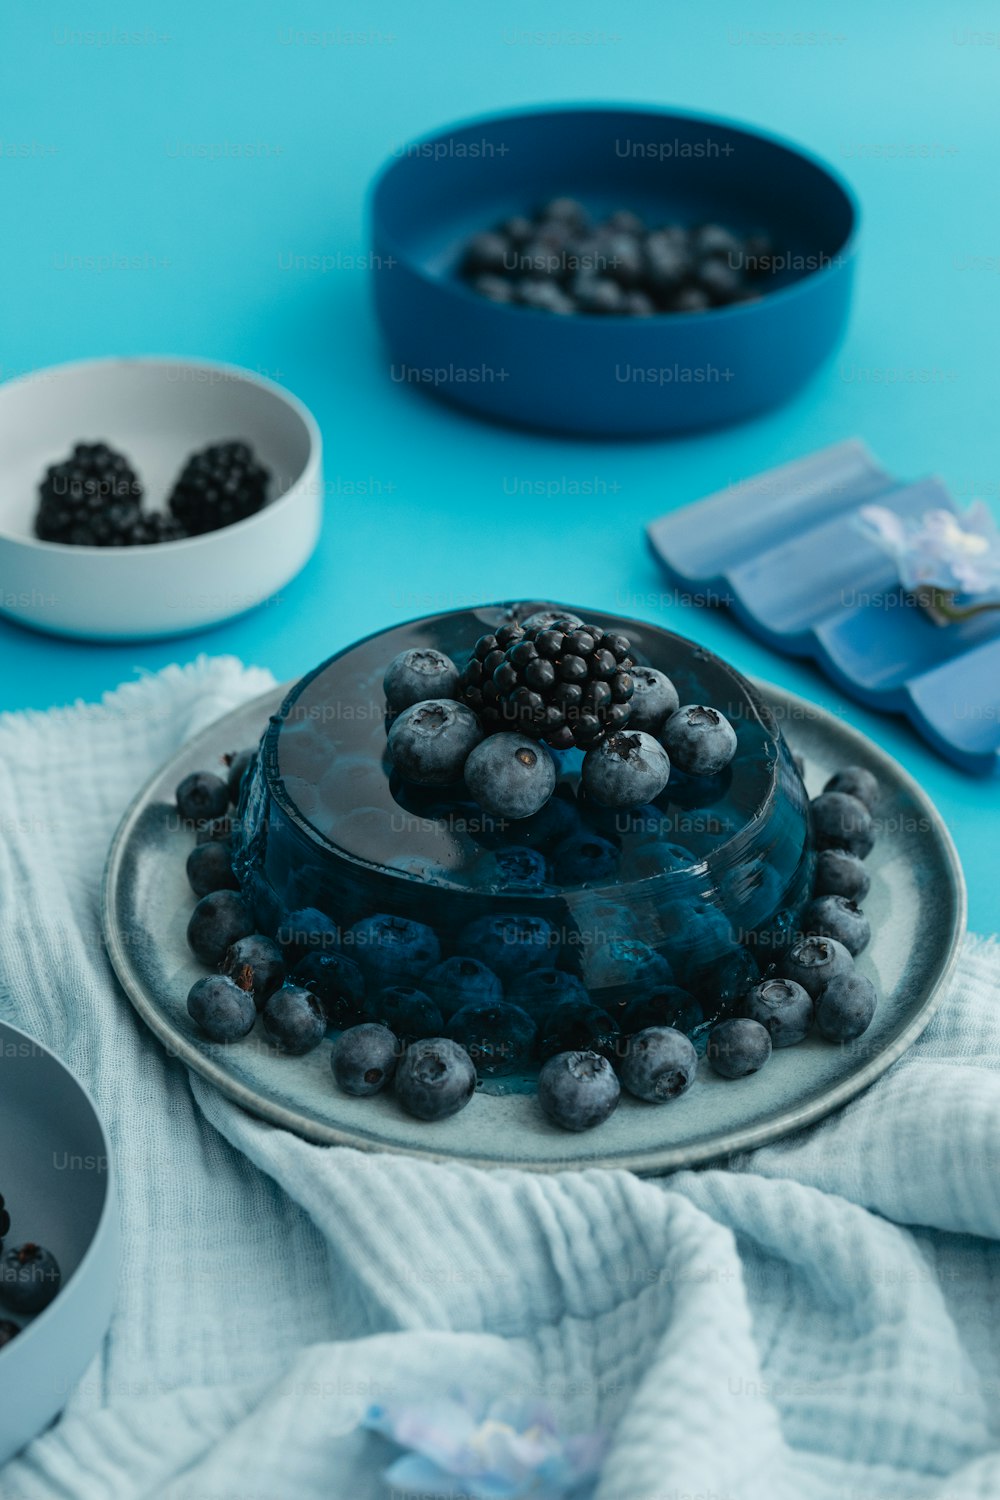 a cake with blueberries and blackberries on a plate